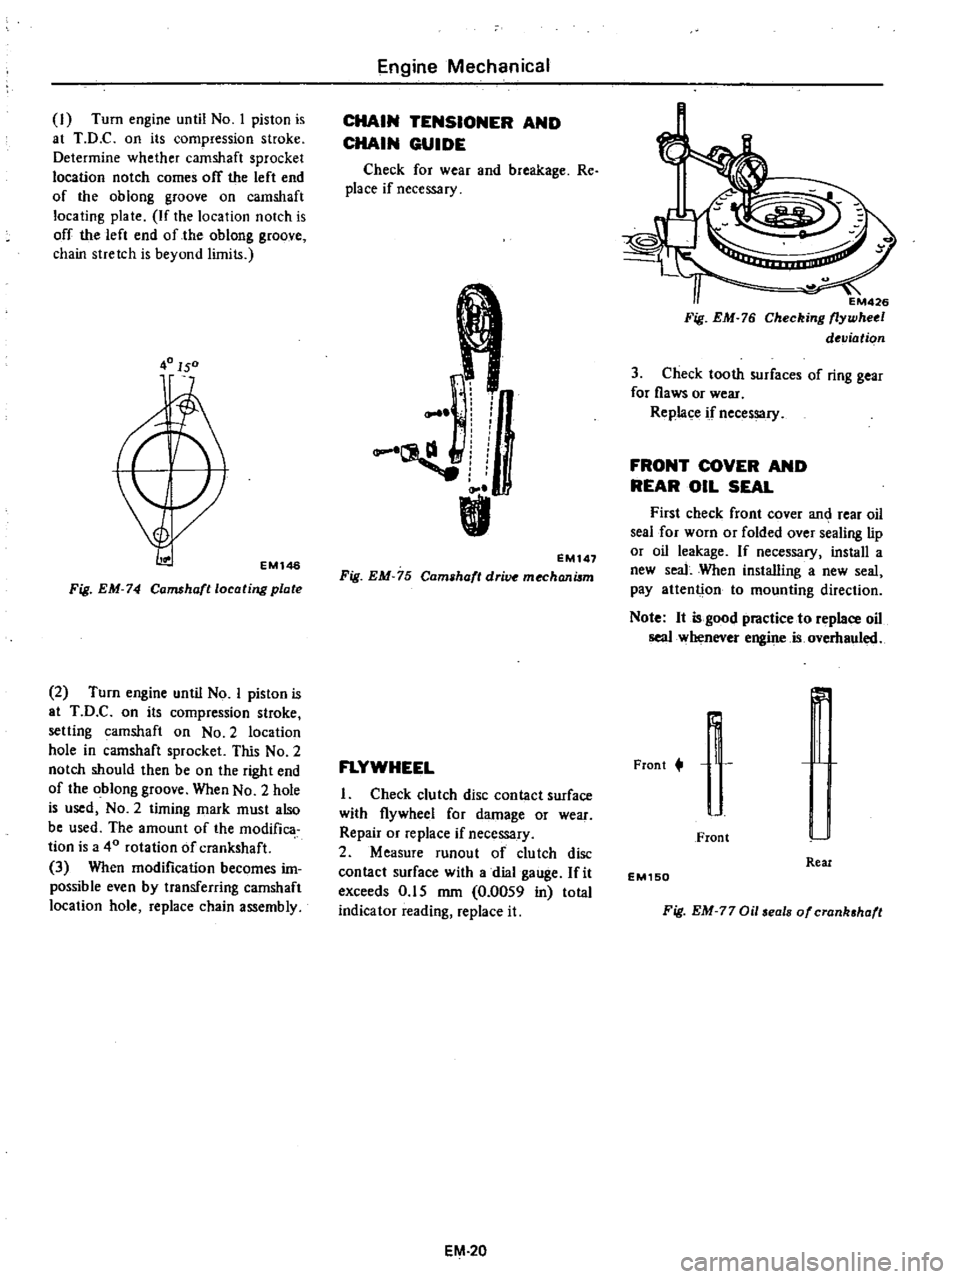 DATSUN PICK-UP 1977  Service Manual 
I 
Turn

engine 
until 
No

I

piston 
is

at 
T 
D 
C 
on

its

compression 
stroke

Determine

whether 
camshaft

sprocket

location 
notch 
comes

off 
the 
left 
end

of 
the

oblong 
groove 
on 